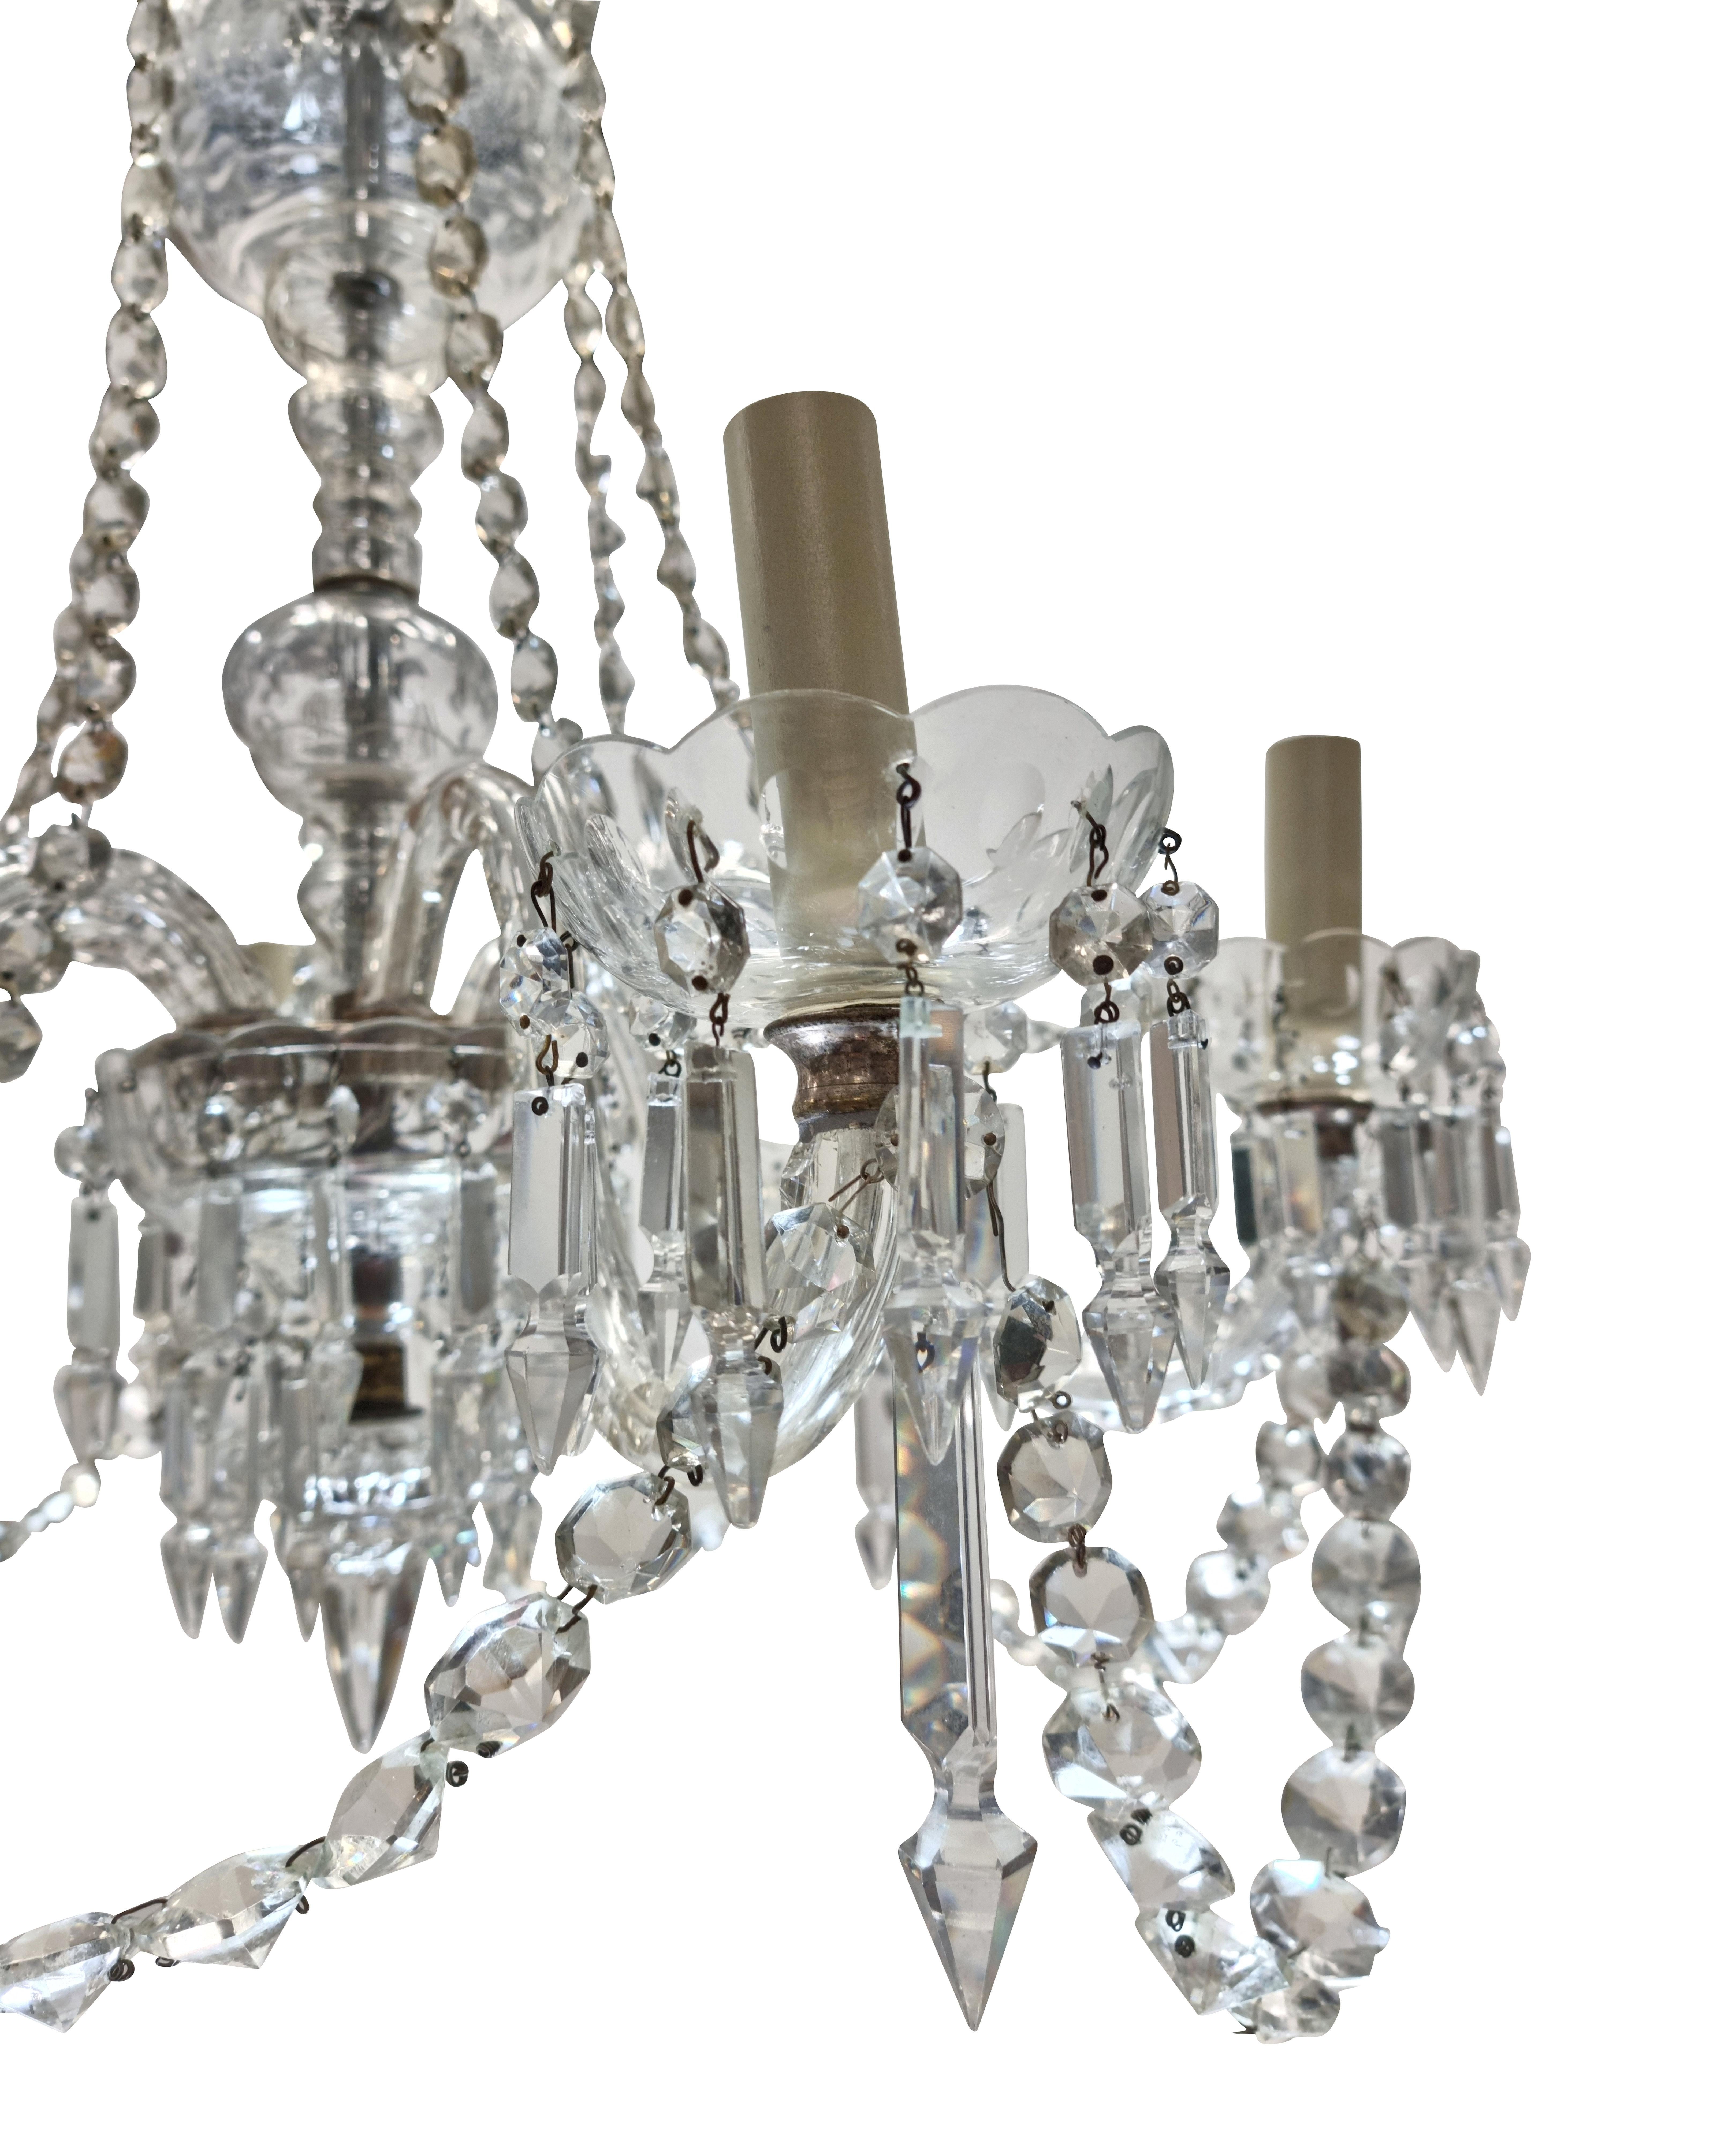 An English cut glass six arm chandelier of good quality, hung throughout with prisms, chains, pendants and swags.